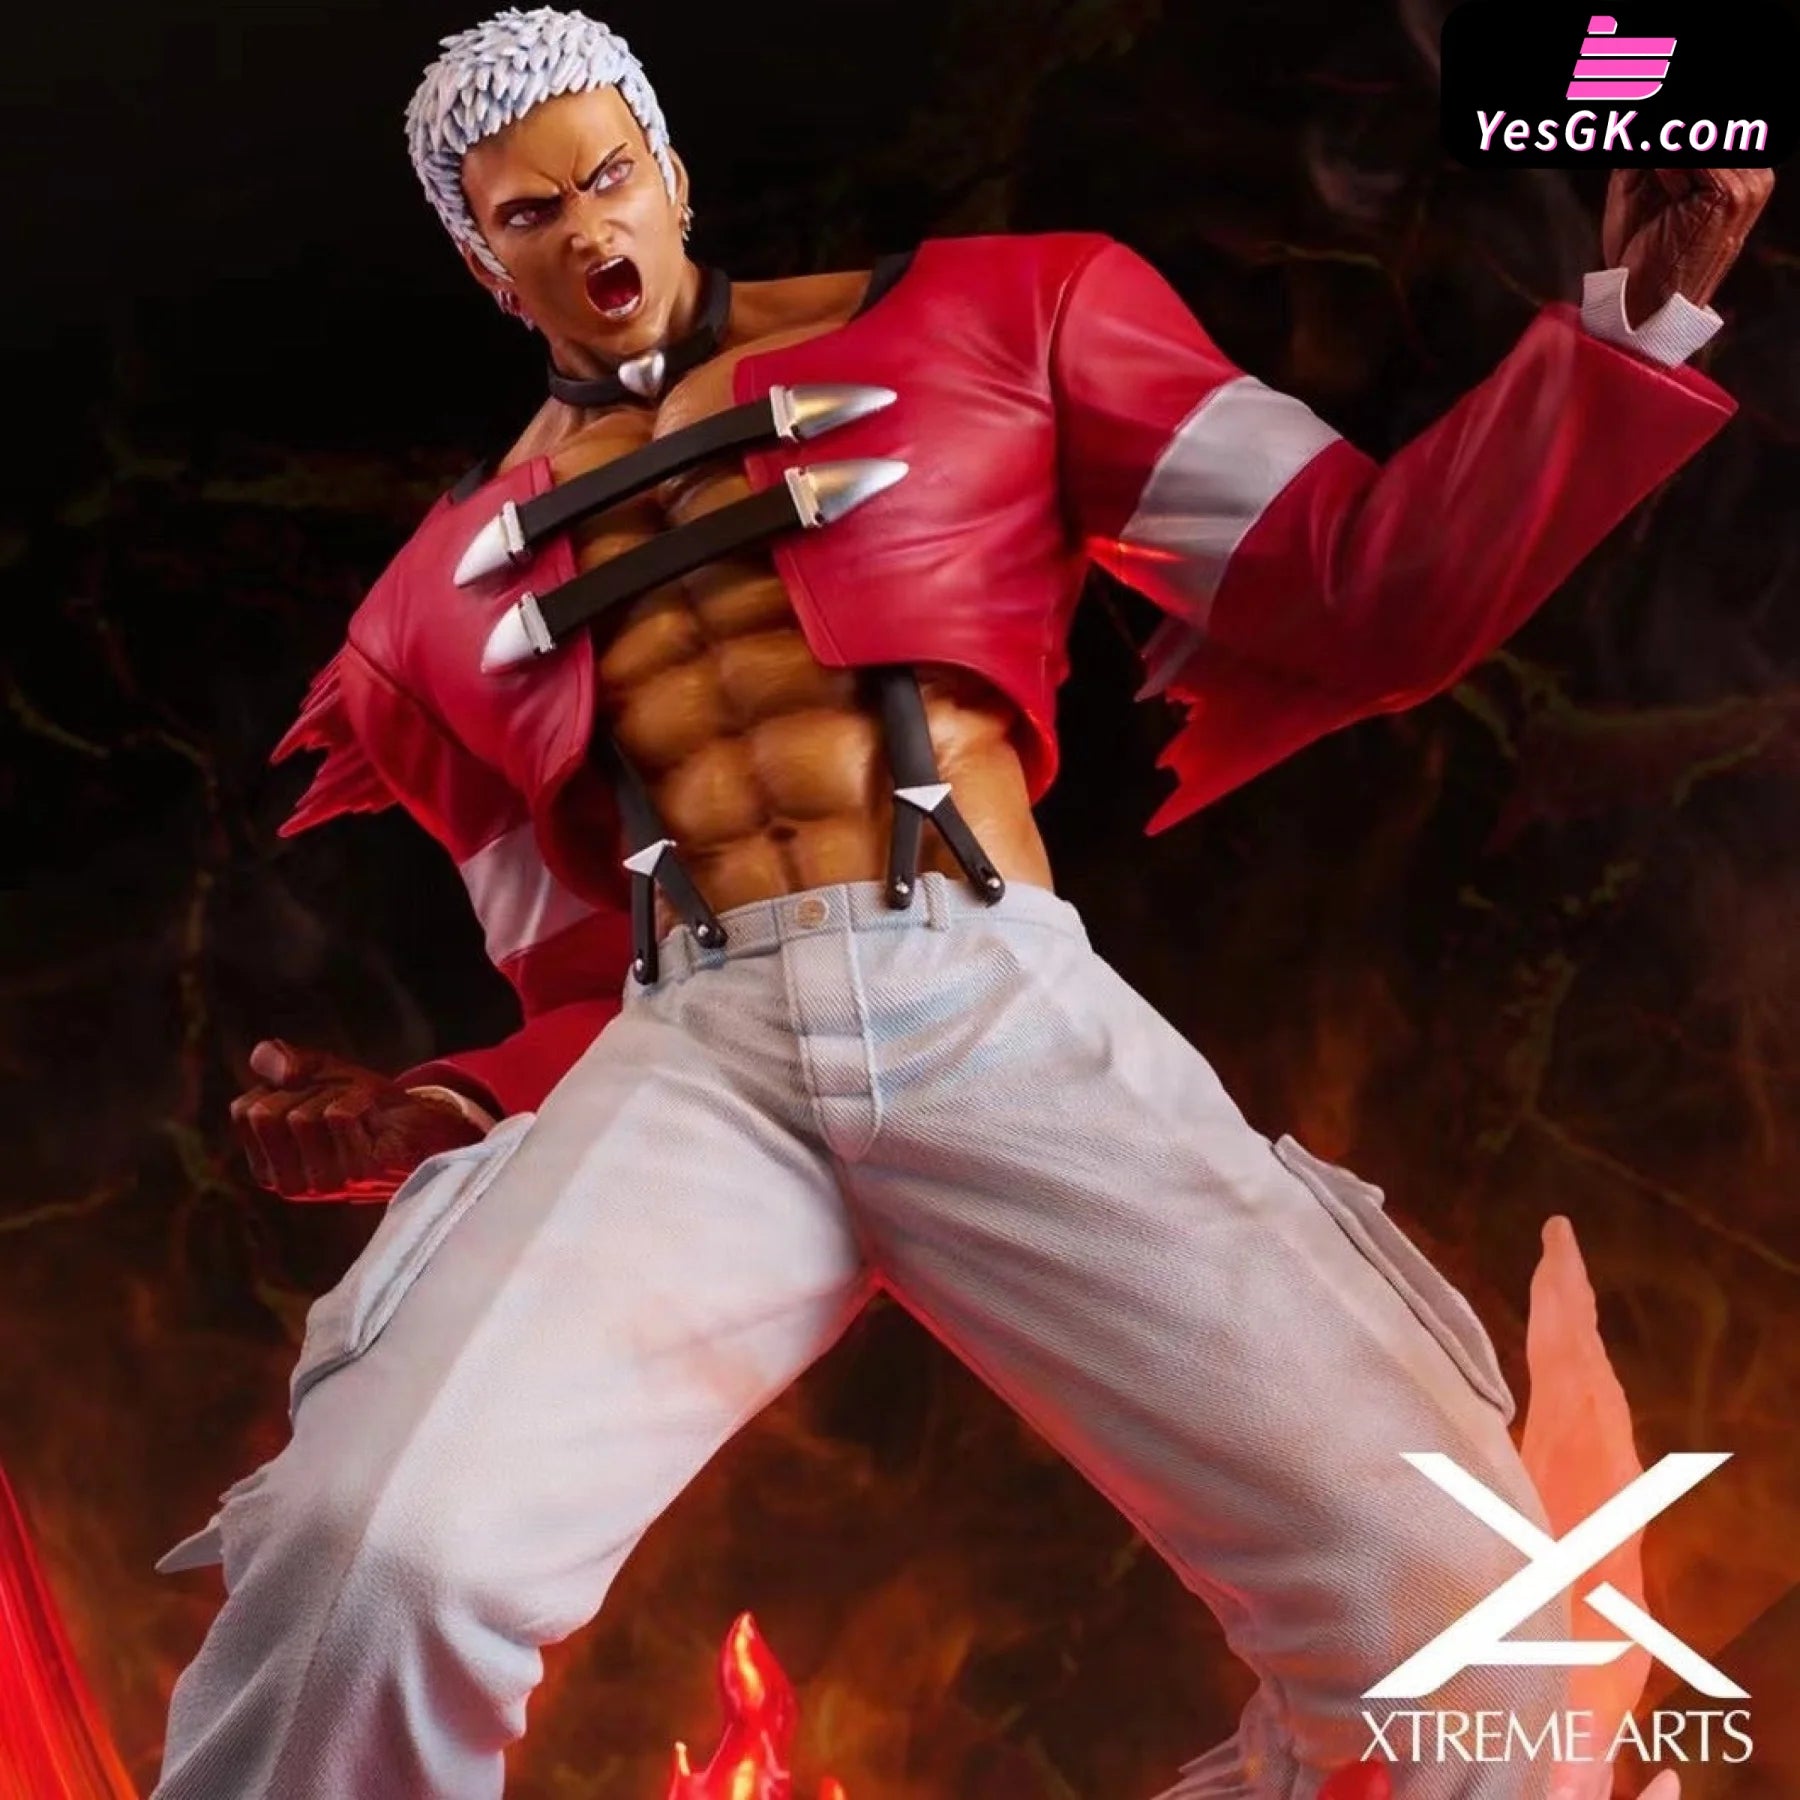 The King of Fighters (Licensed) Collectibles Statue